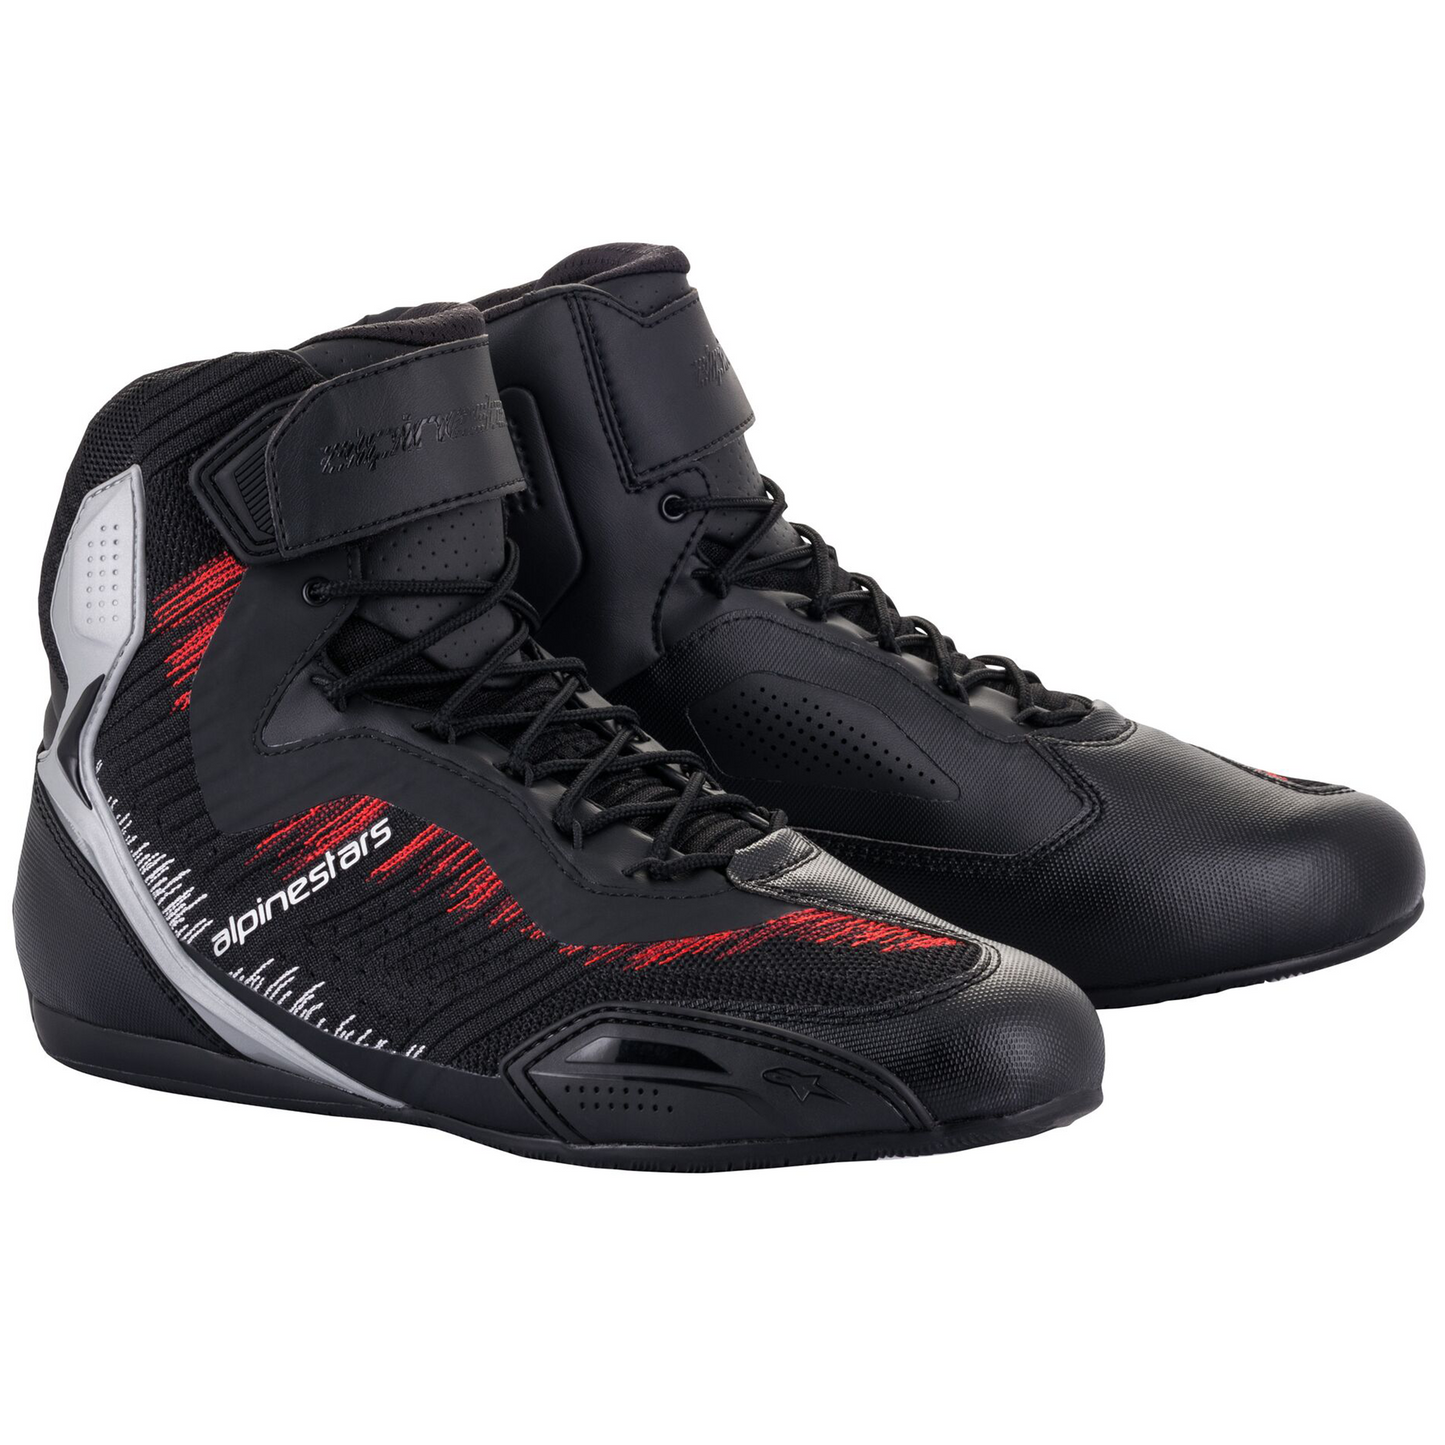 Alpinestars Faster-3 Ride Knit Shoes - Black/Silver/Bright Red